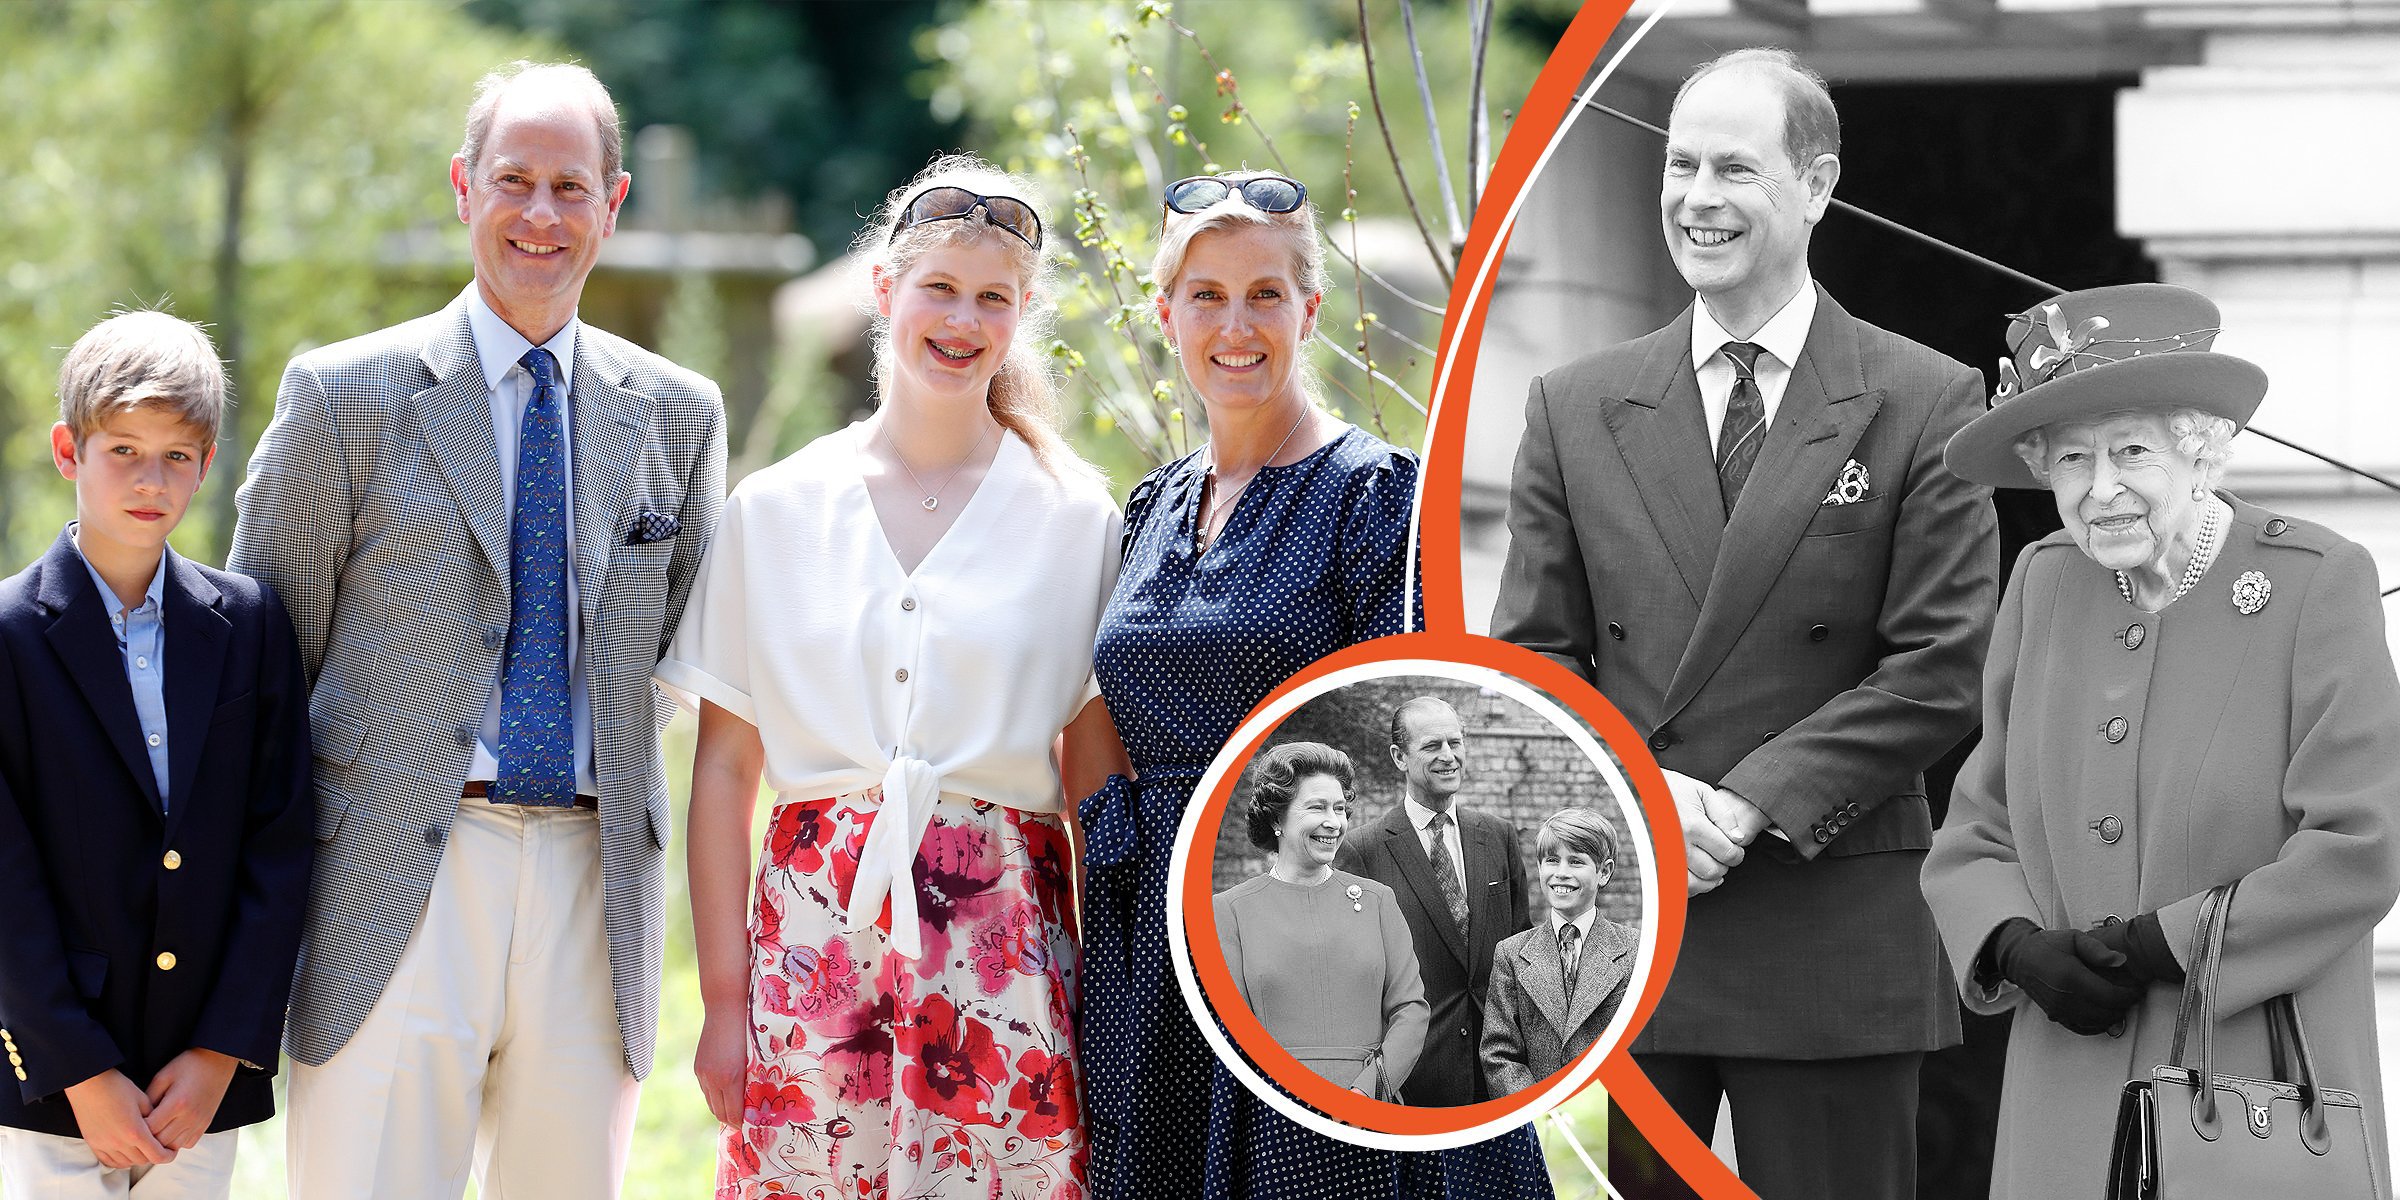 James, Viscount Severn, Prince Edward, Earl of Wessex, Lady Louise Windsor and Sophie, Countess of Wessex | Prince Edward, Earl of Wessex, Queen Elizabeth II | Queen Elizabeth, Prince Philip, and their son, Prince Edward | Source: Getty images